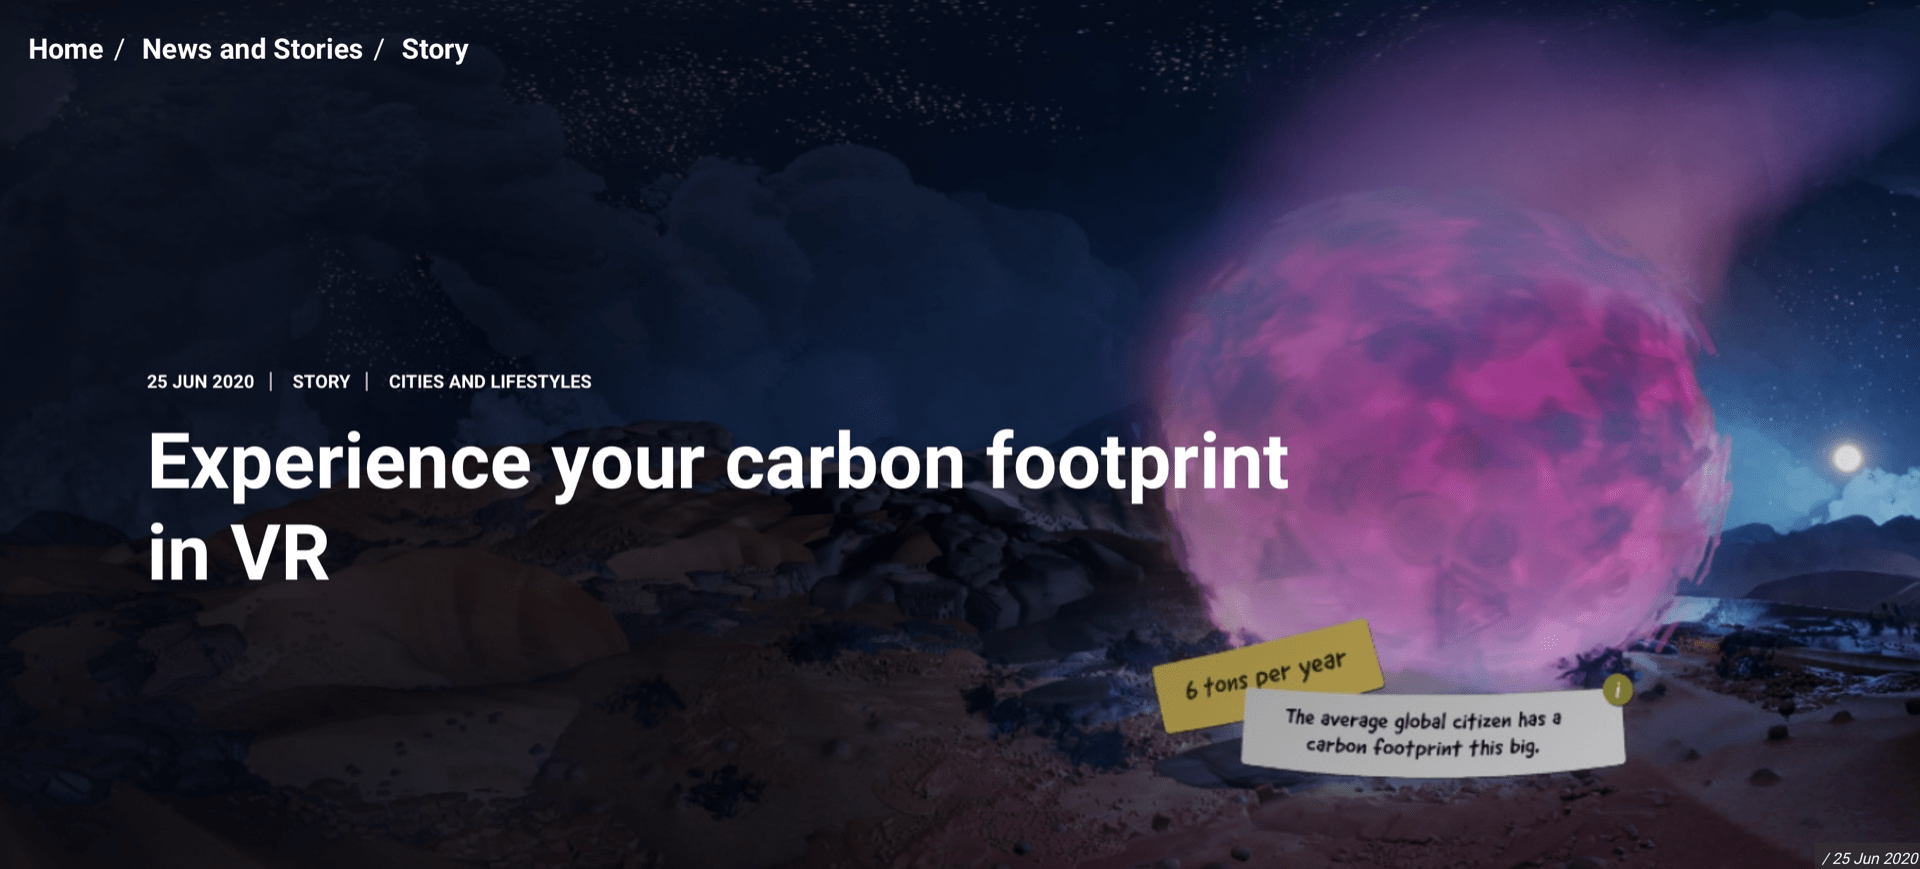 Experiencing your Carbon Footprint using Virtual Reality